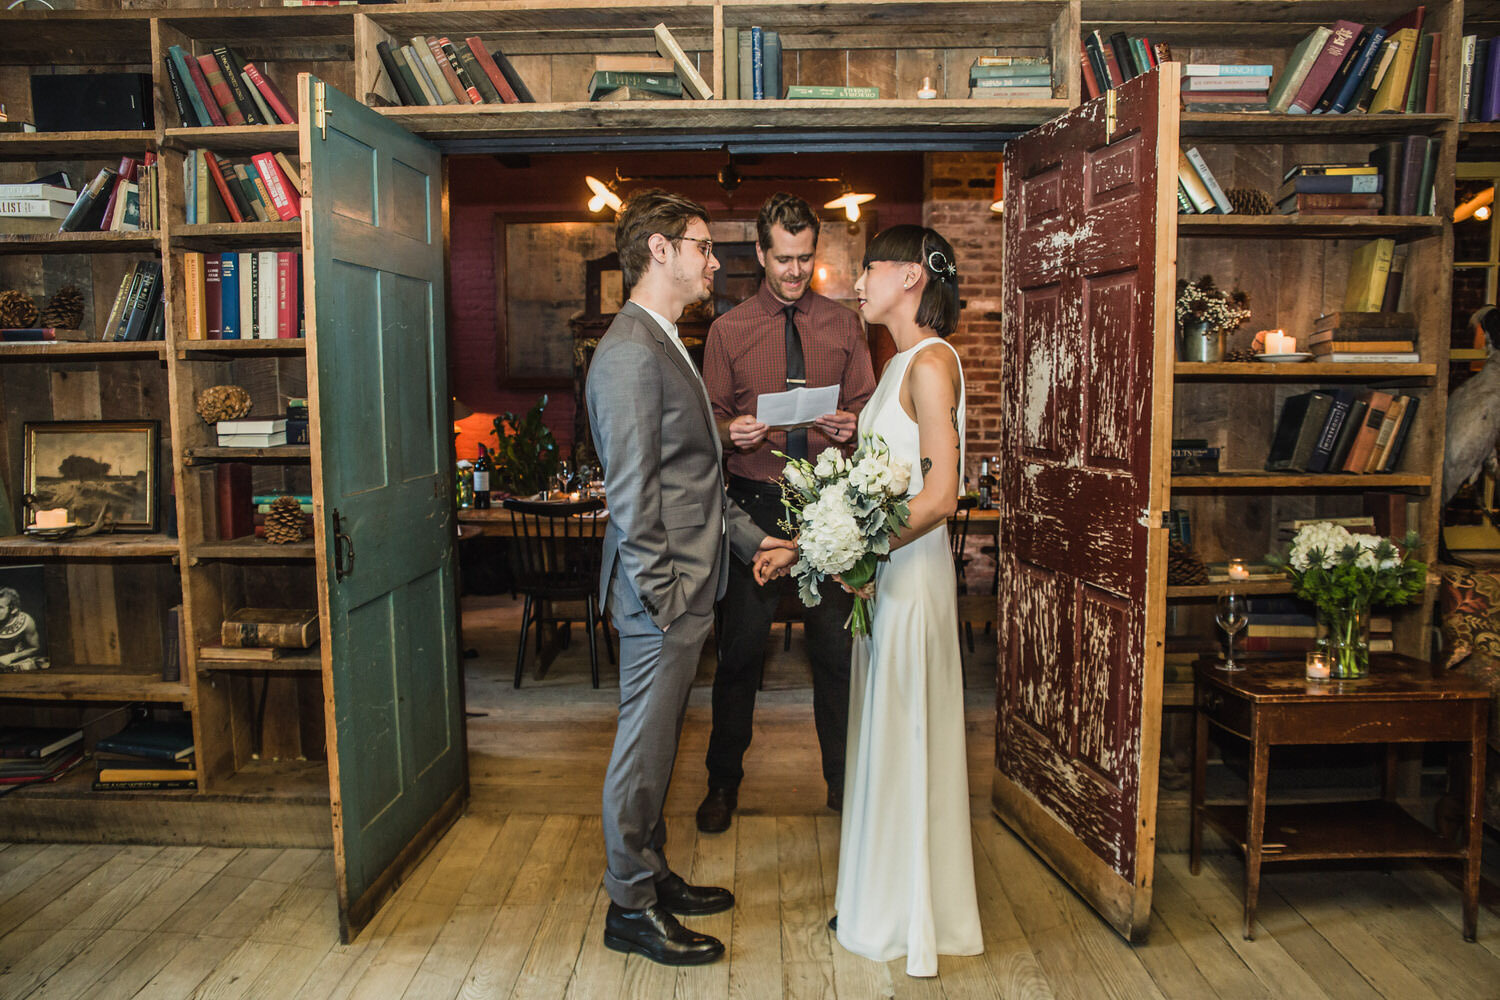 new york lowwer east side wedding intimate ceremony eclectic modern48.jpg